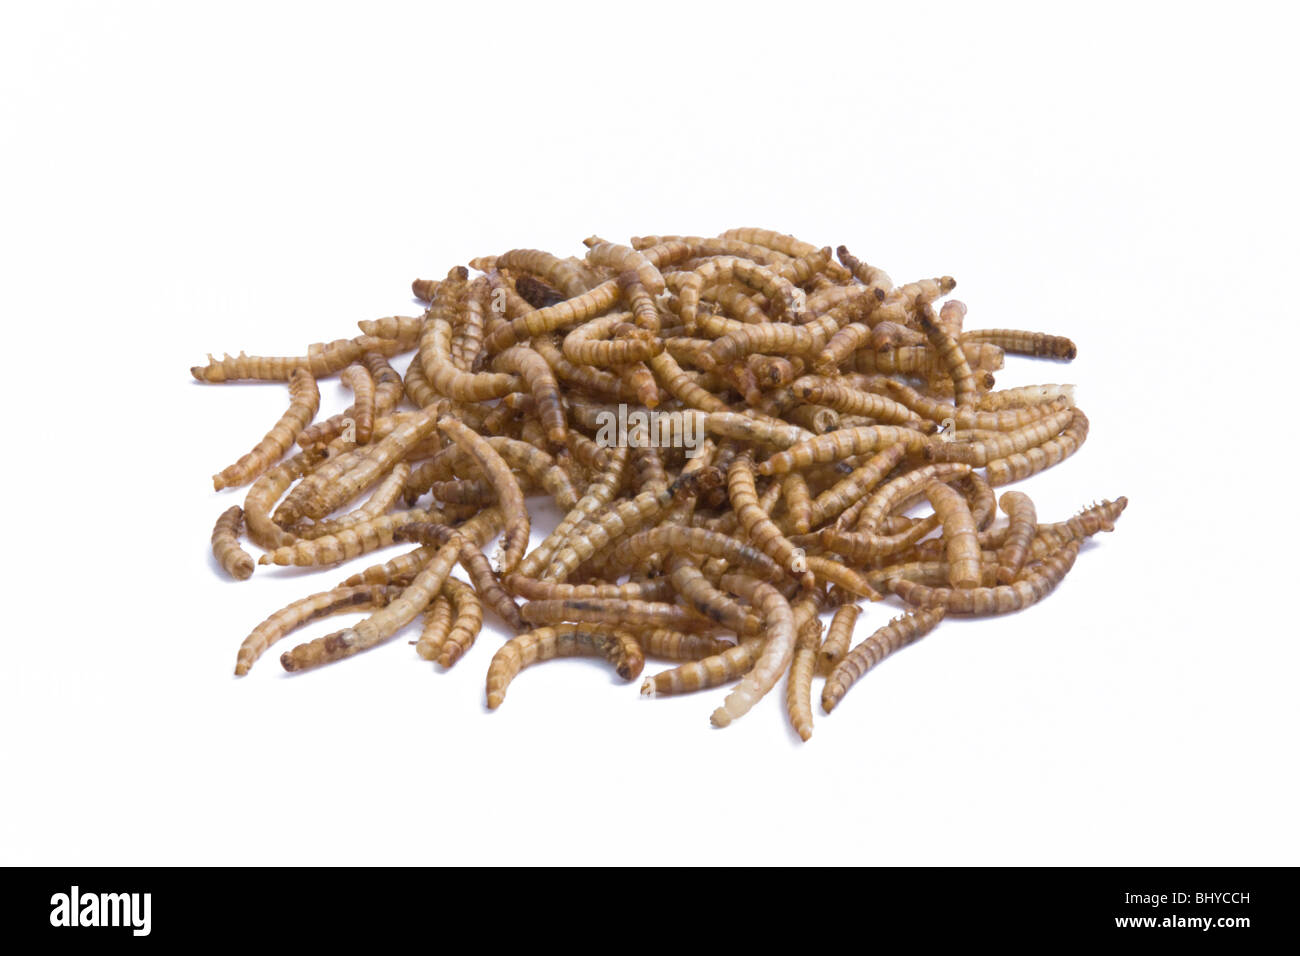 Dried meal worms sold as bird food Stock Photo